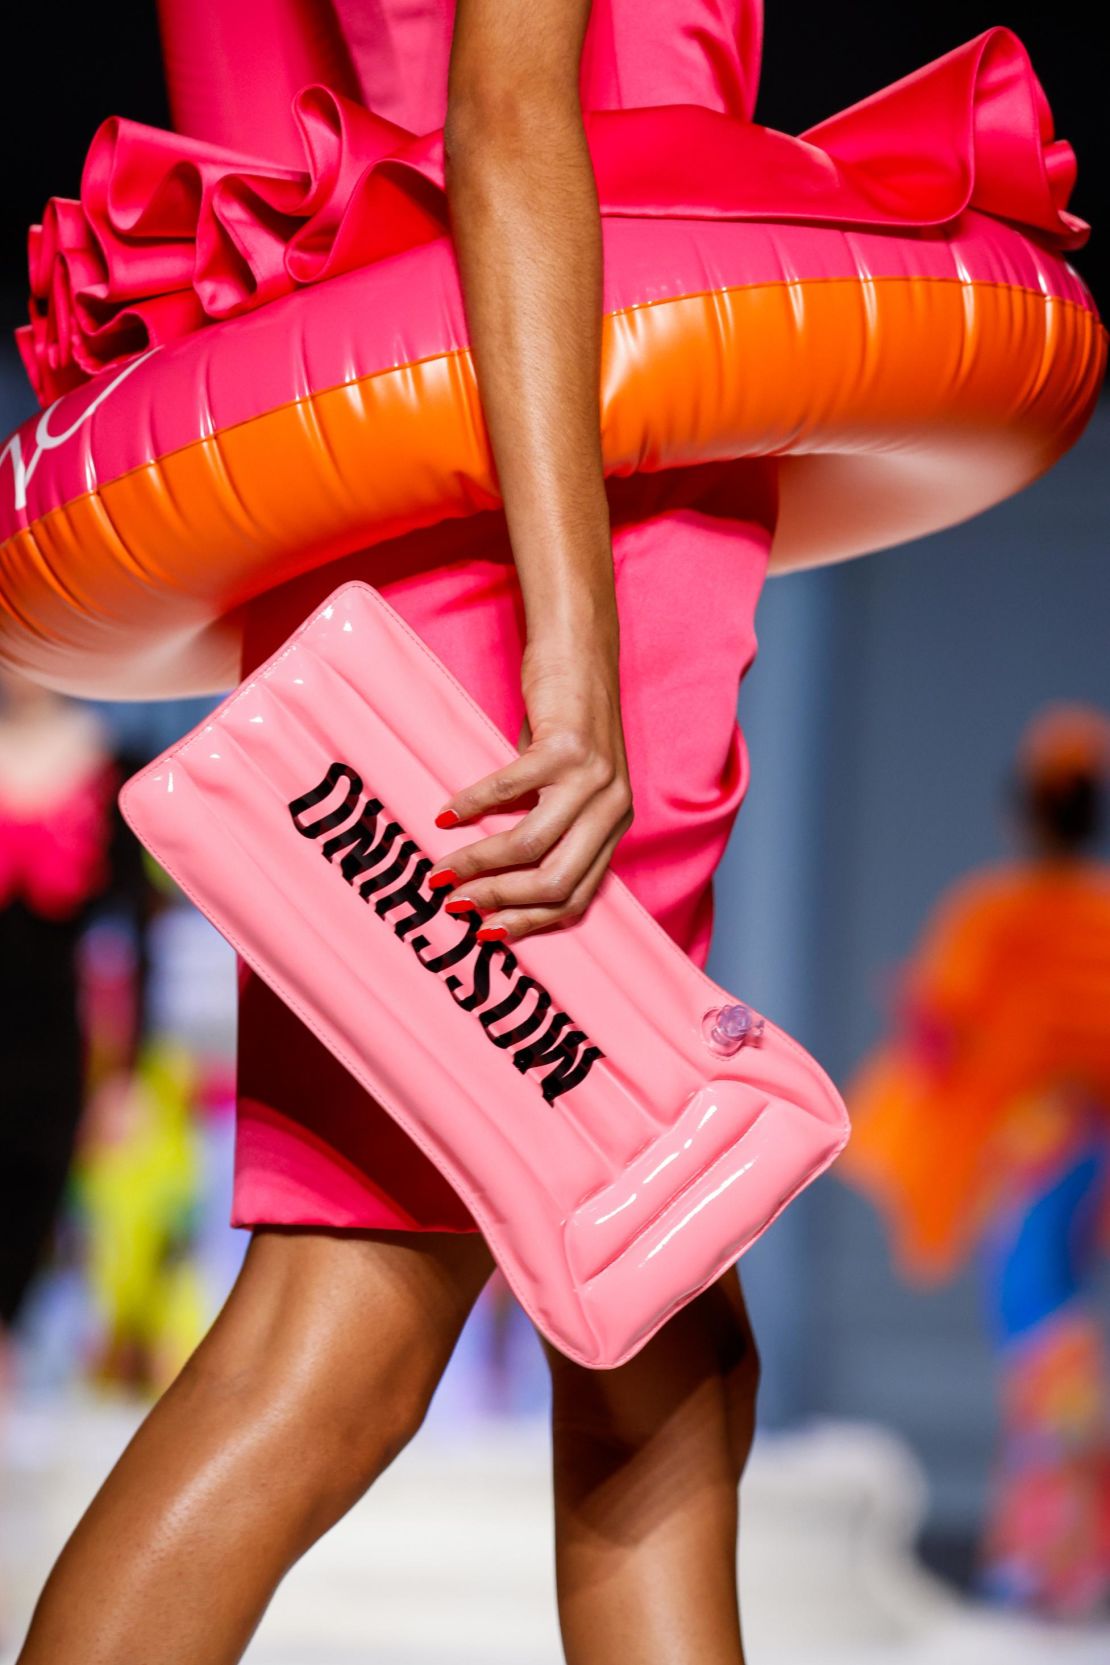 Moschino's Spring-Summer 2023 collection included inflatable purses.